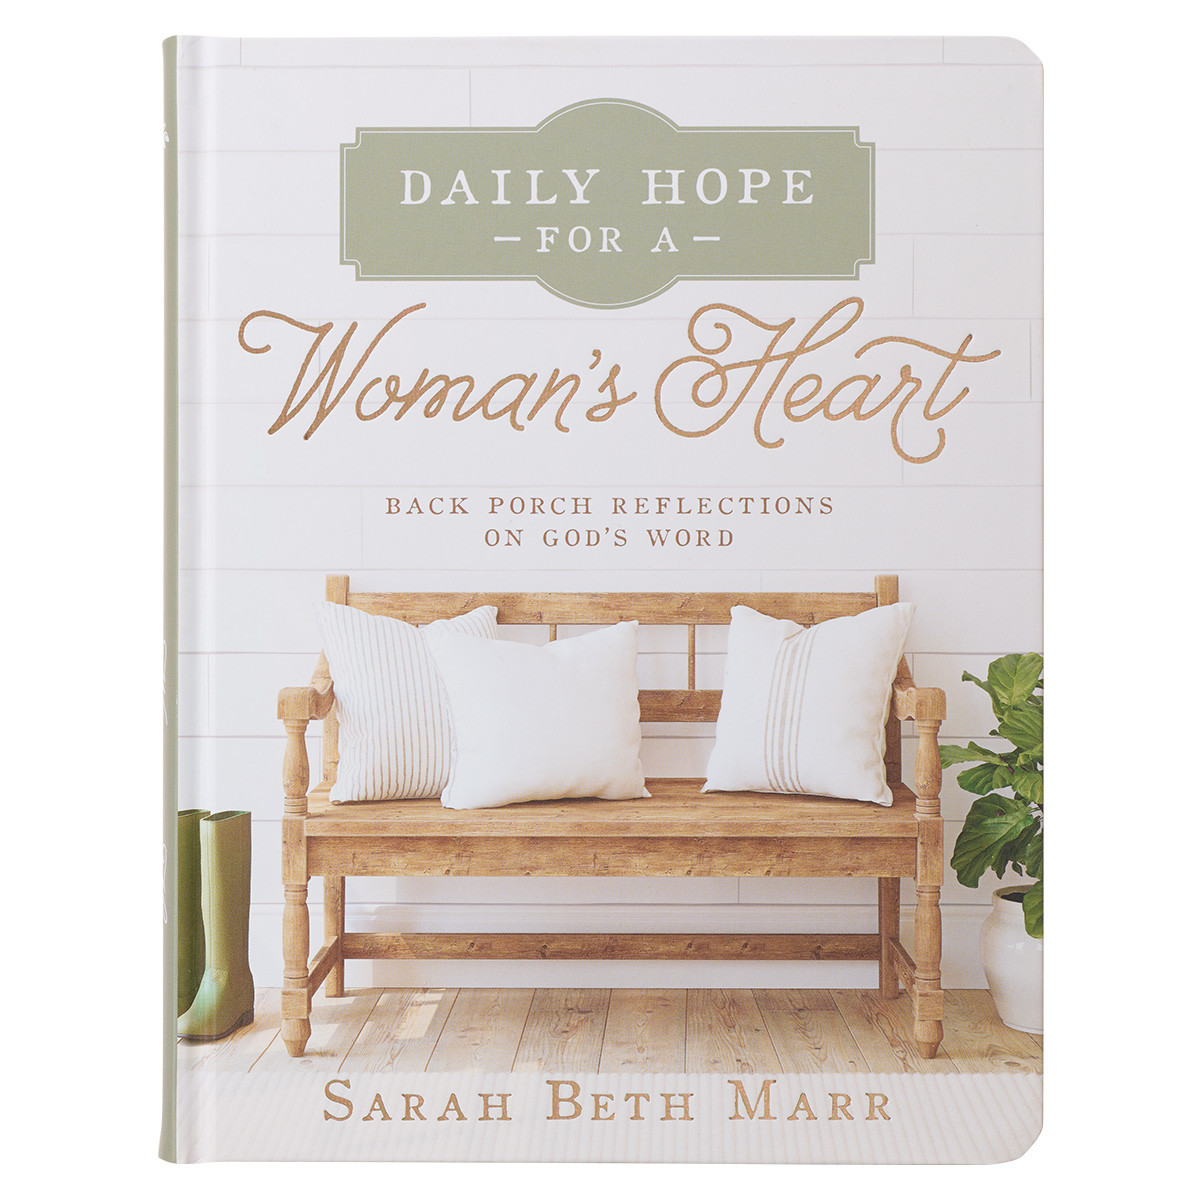 "Daily Hope for a Woman's Heart" by Sarah Beth Marr - 9781642726527